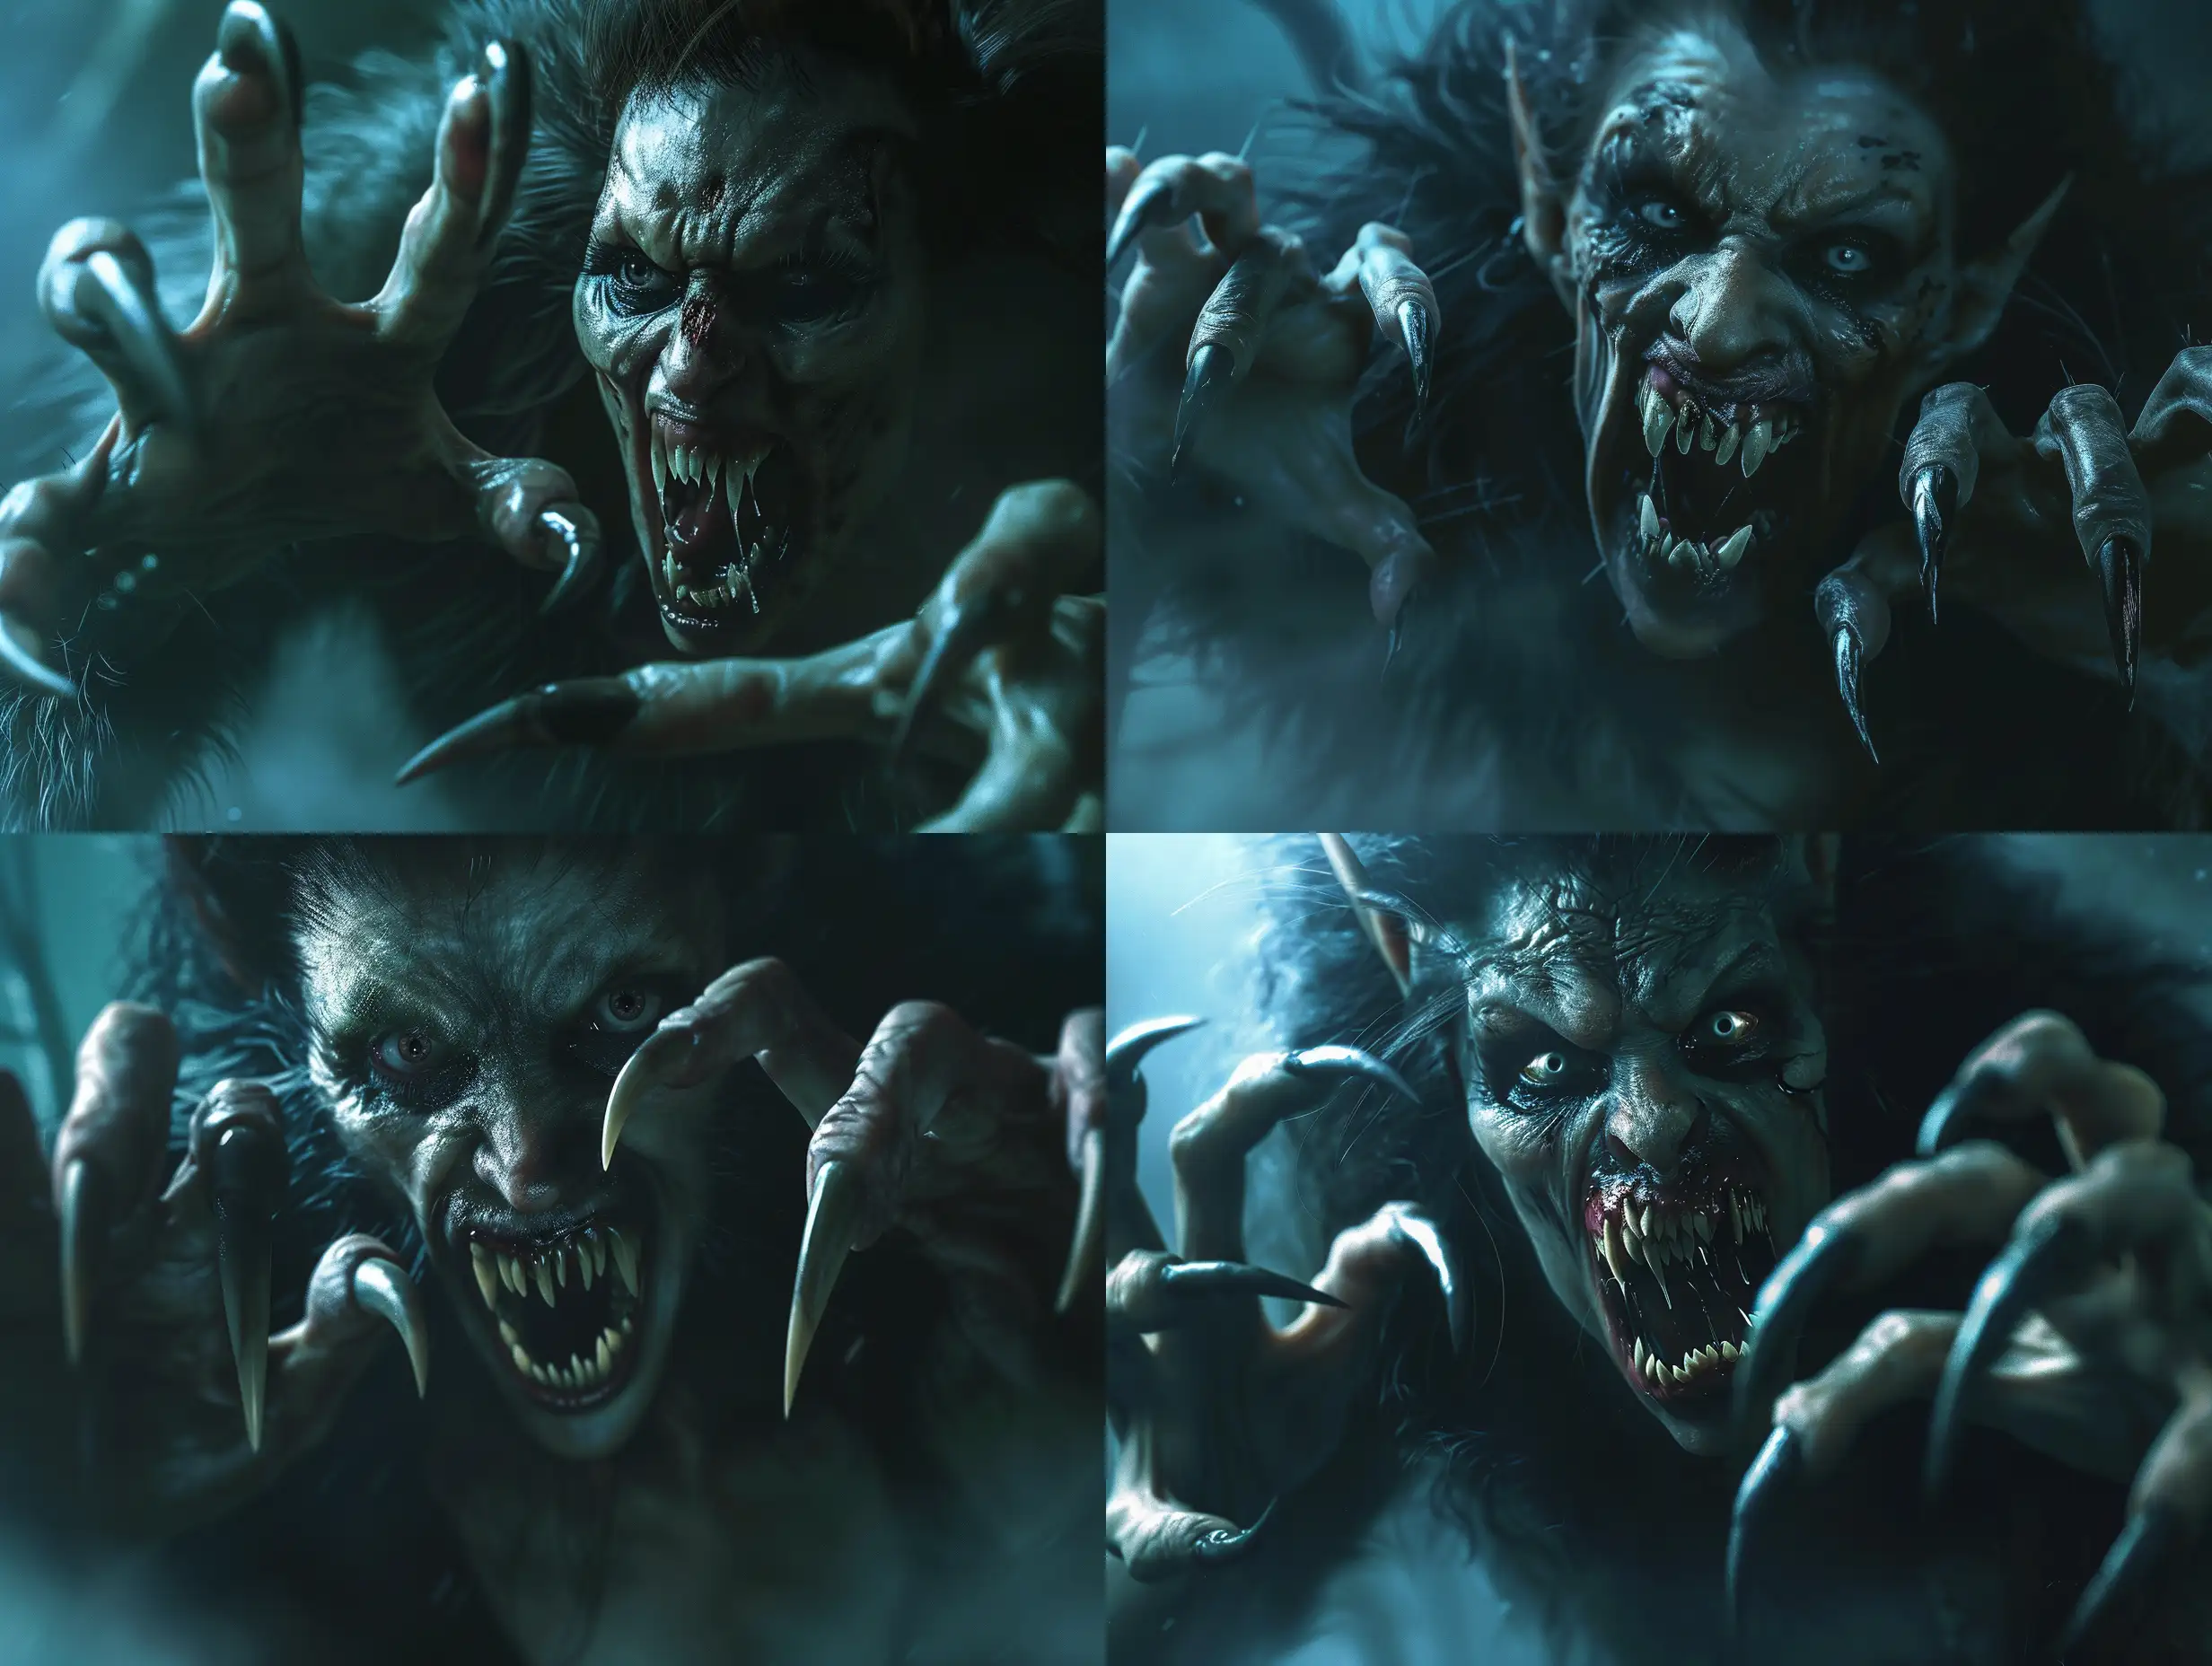 Photorealism of a monstrous female vampire with long, curved, pointed nails, exuding an aggressive and terrifying presence. Her pointed, crooked teeth form a scary expression amidst a dark and atmospheric setting. The high-quality depiction should capture the aggressive attack, emphasizing her predatory fangs and detailed nails in a hyper-realistic manner. The lighting should contribute to the horror atmosphere, ensuring a full-body portrayal with realistic hyper-detail. The character design should convey a playful yet menacing quality, with full anatomical accuracy including distinctly human hands with five fingers. The final image must be very clear without flaws, portraying the vampire with unparalleled photorealism